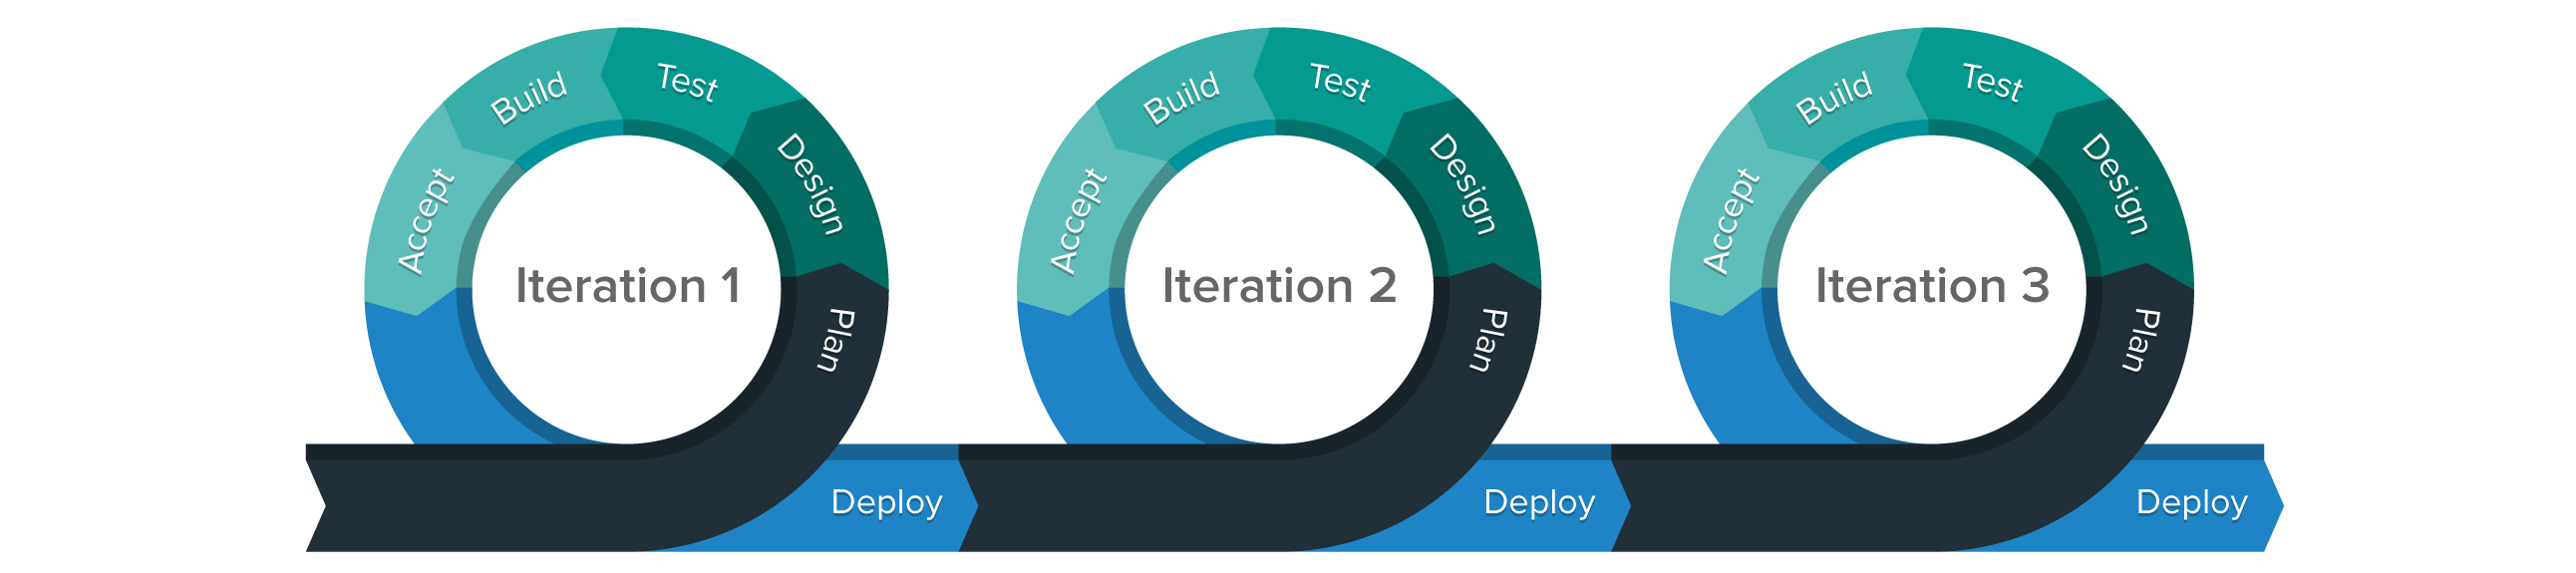 The agile software development process showing three iterations